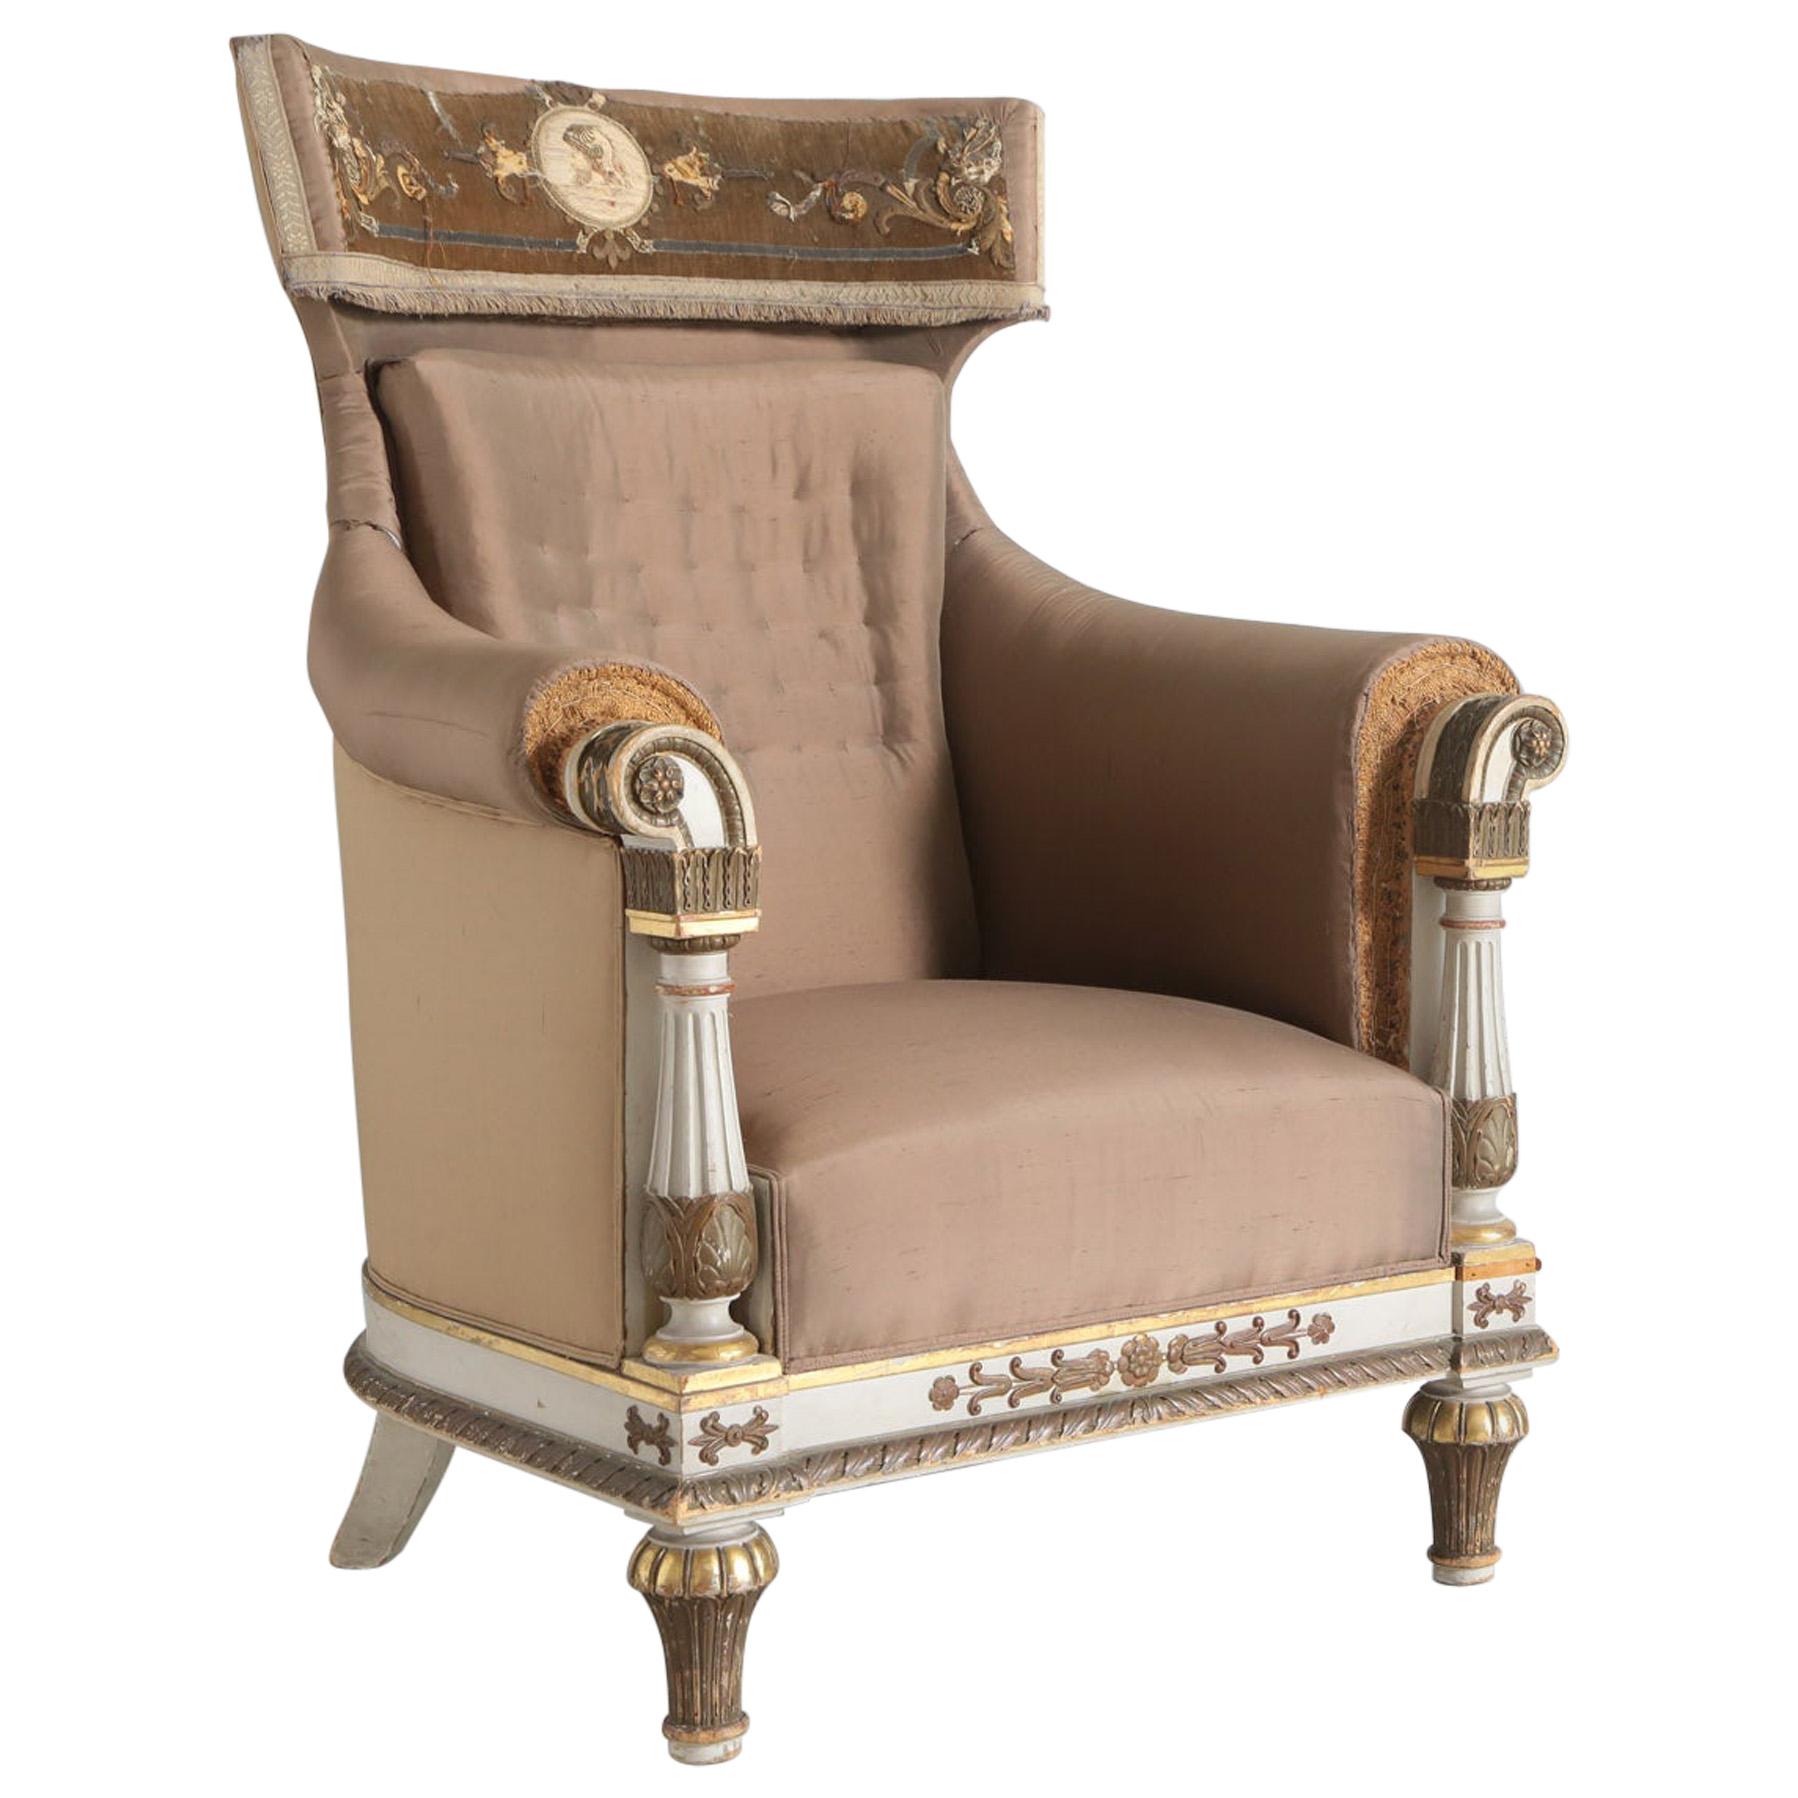 Italian Poets Chair with Original Paintwork, Carving and Embroidery For Sale